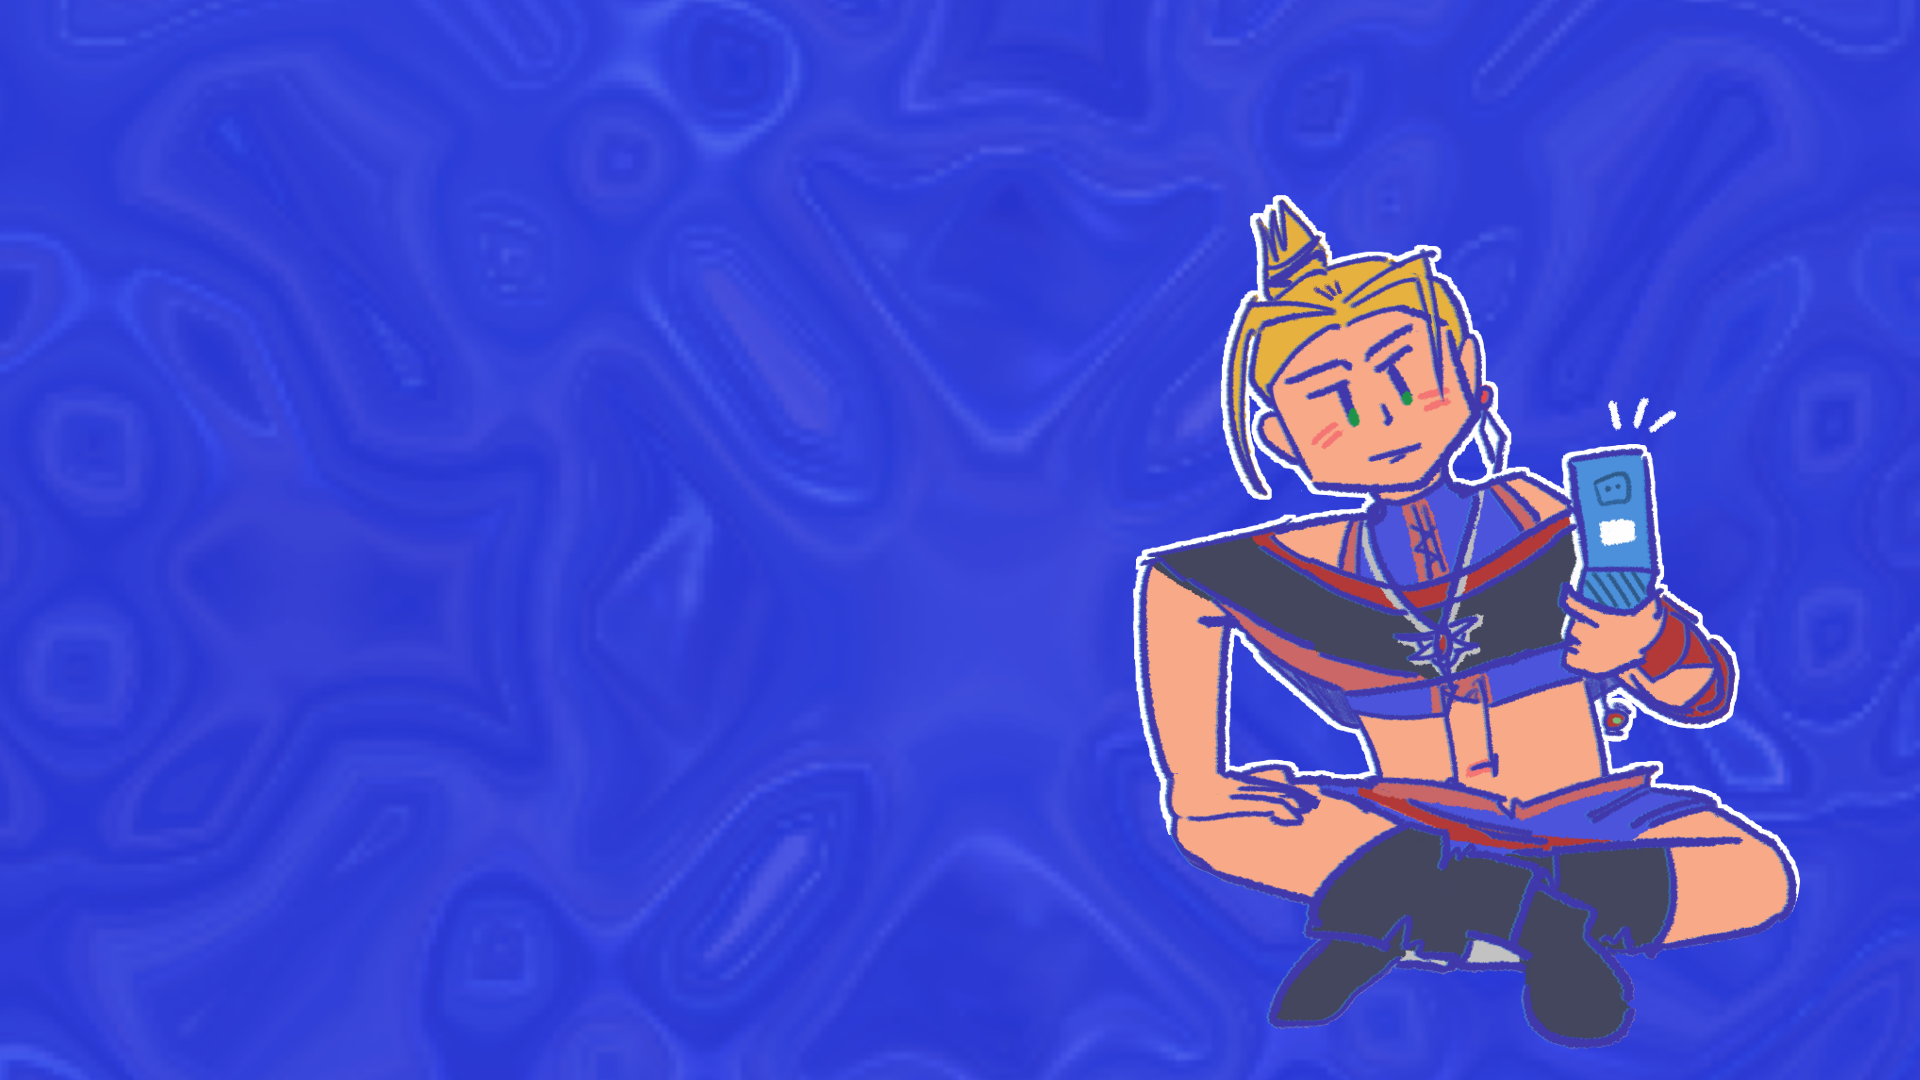 drawing of tara sitting down, cross legged with one hand on her knee, looking frustrated at a blue flip phone she is holding. there are symbols of excitement emanating off the phone. the background is a blue fluid texture, taken from lost kingdoms' battle skybox.